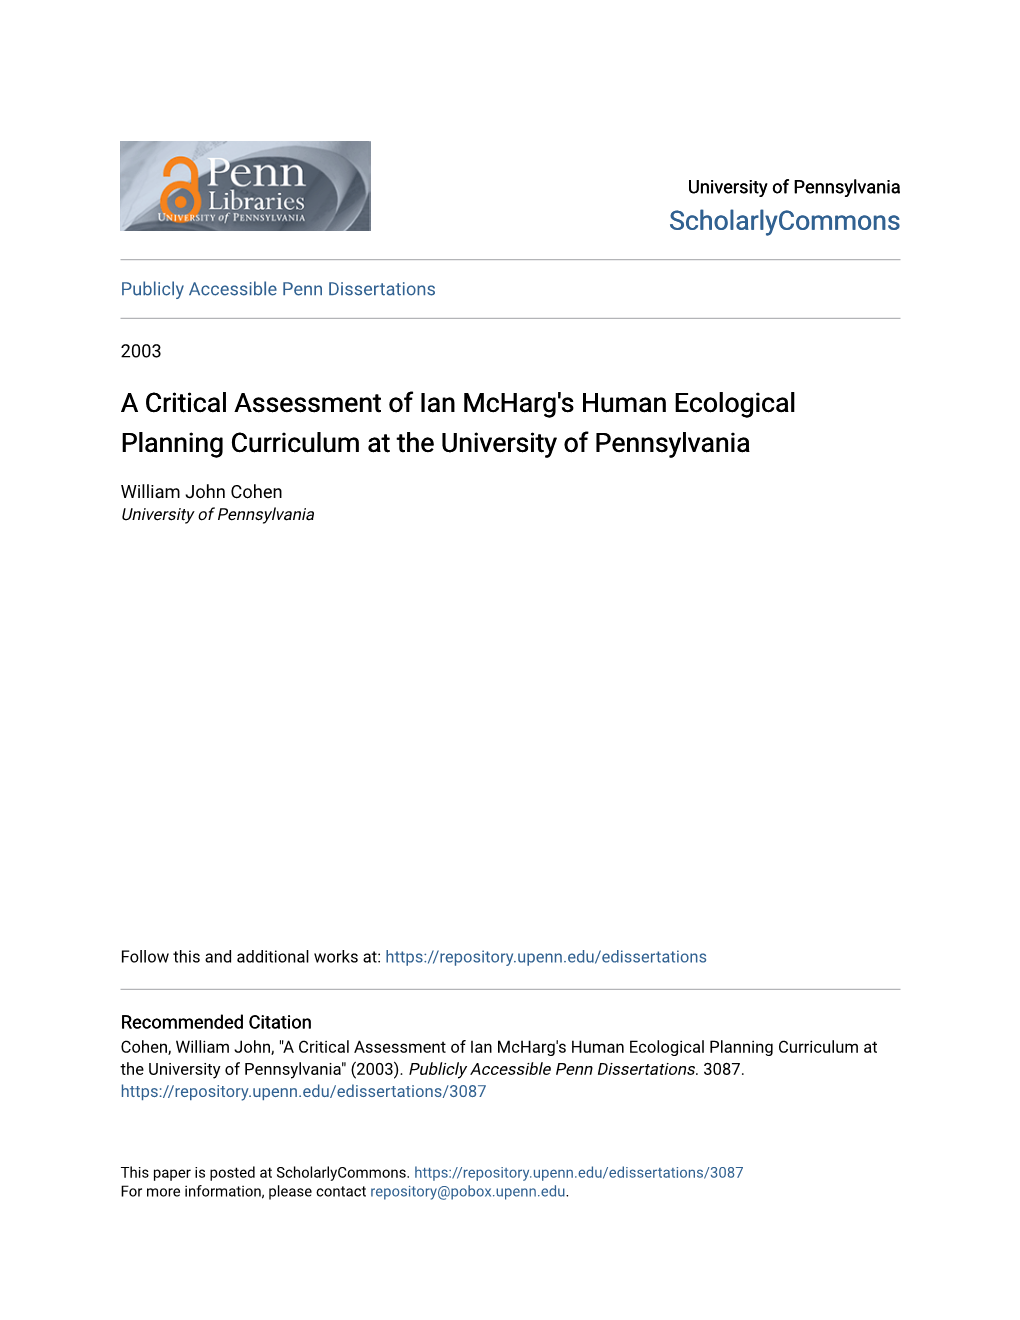 A Critical Assessment of Ian Mcharg's Human Ecological Planning Curriculum at the University of Pennsylvania